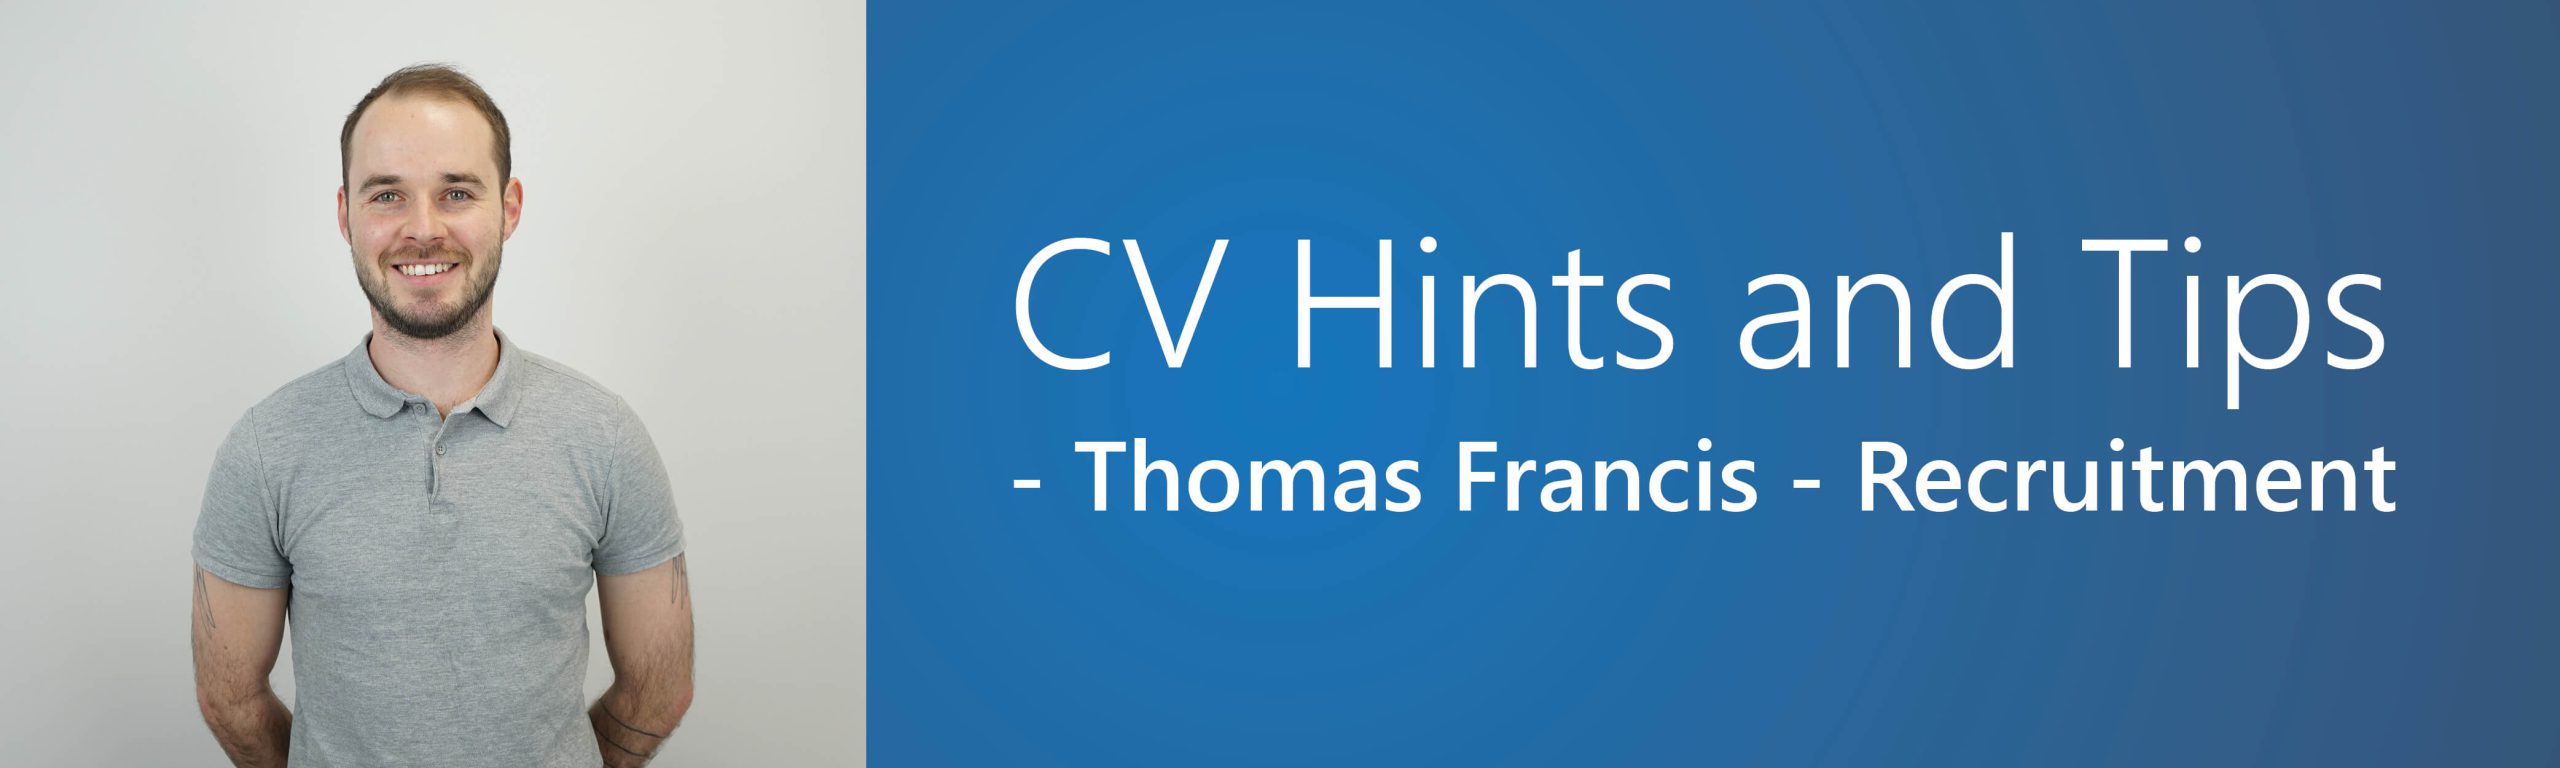 CV Hints and Tips Banner